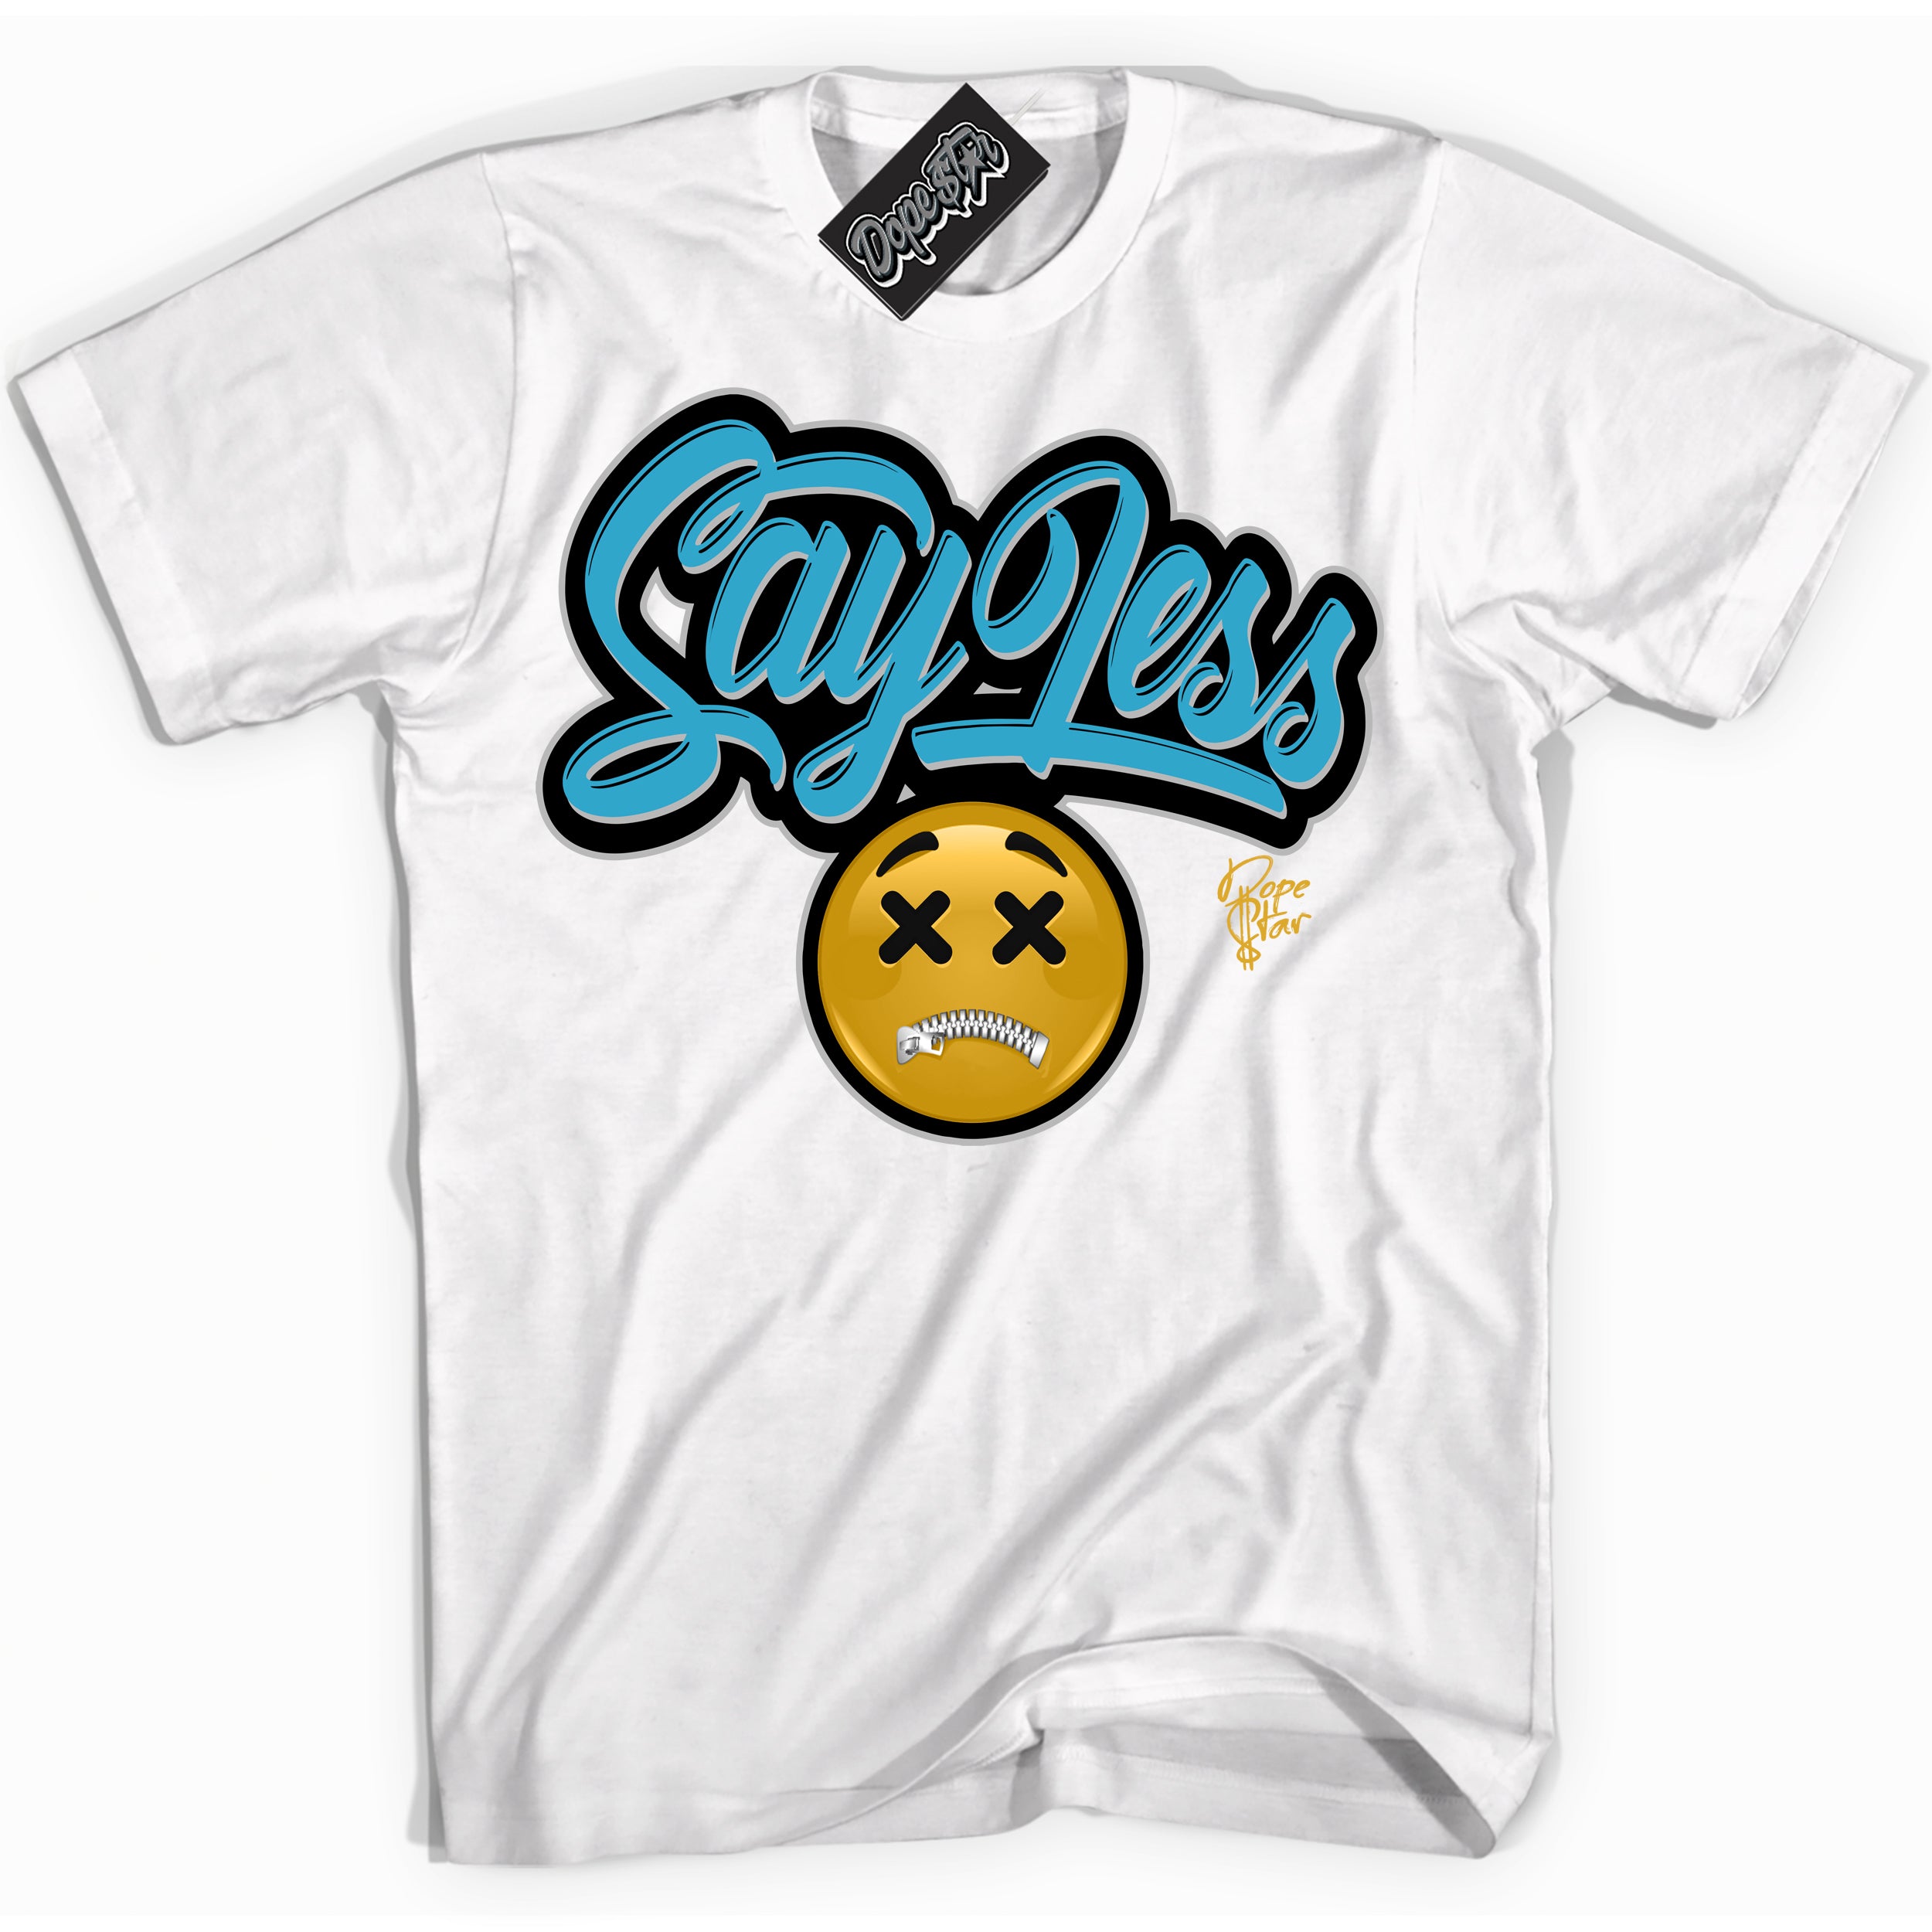 Cool White Shirt with “ Say Less” design that perfectly matches Aqua 5s Sneakers.